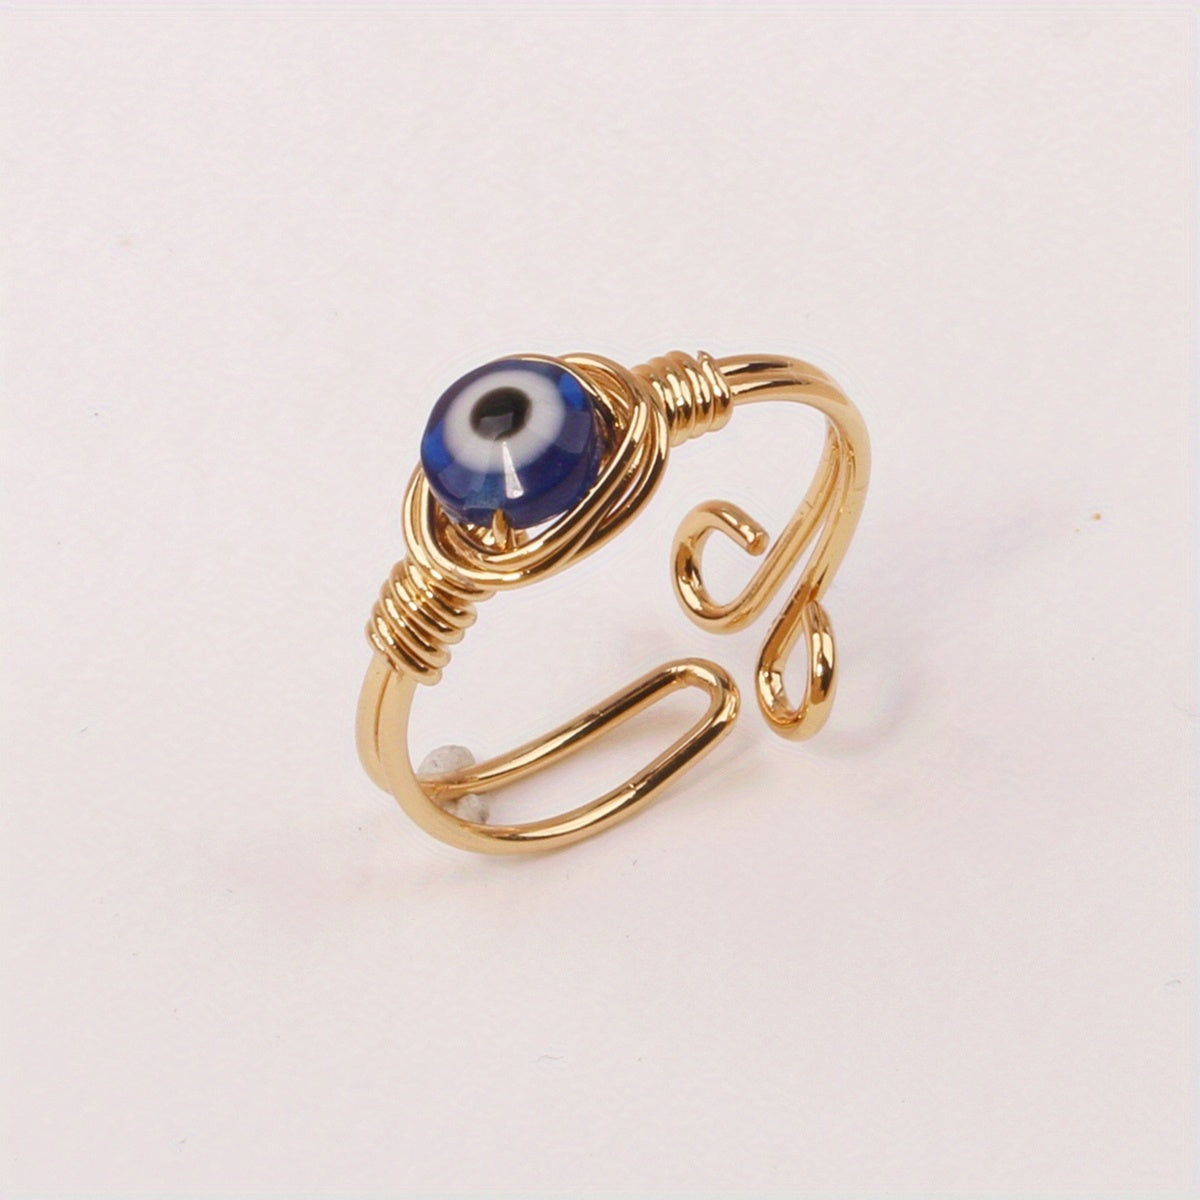 1pc Blue Evil Eyes Open Adjustable Rings Dainty Lucky Protection Jewelry Gifts